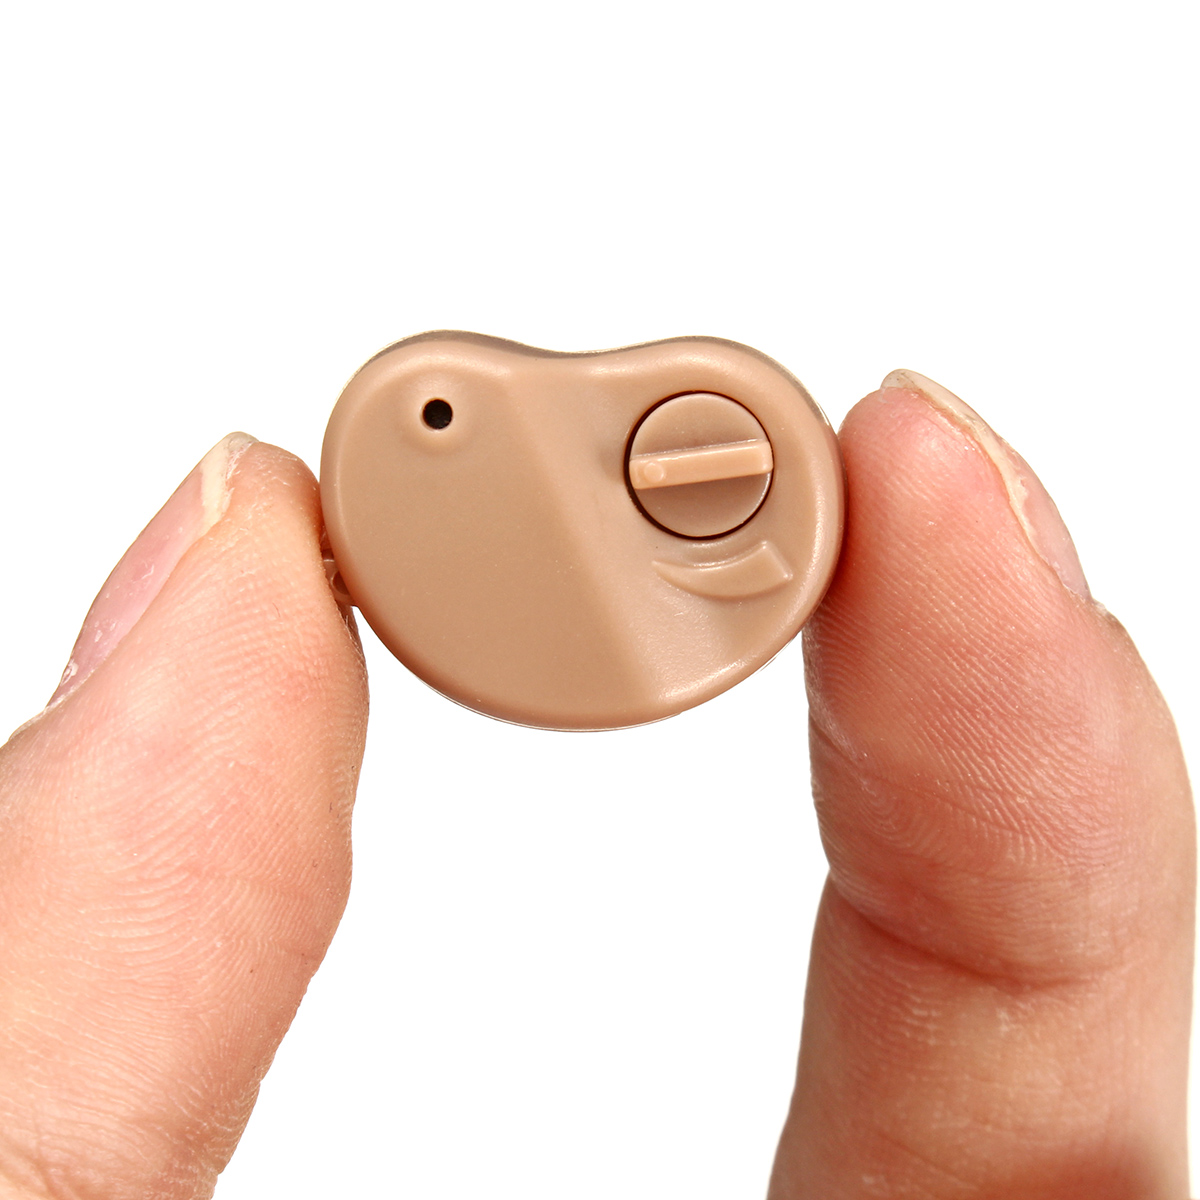 Adjustable Digital Hearing Aids Mini In-Ear Best Sound Voice Amplifier Invisible 40